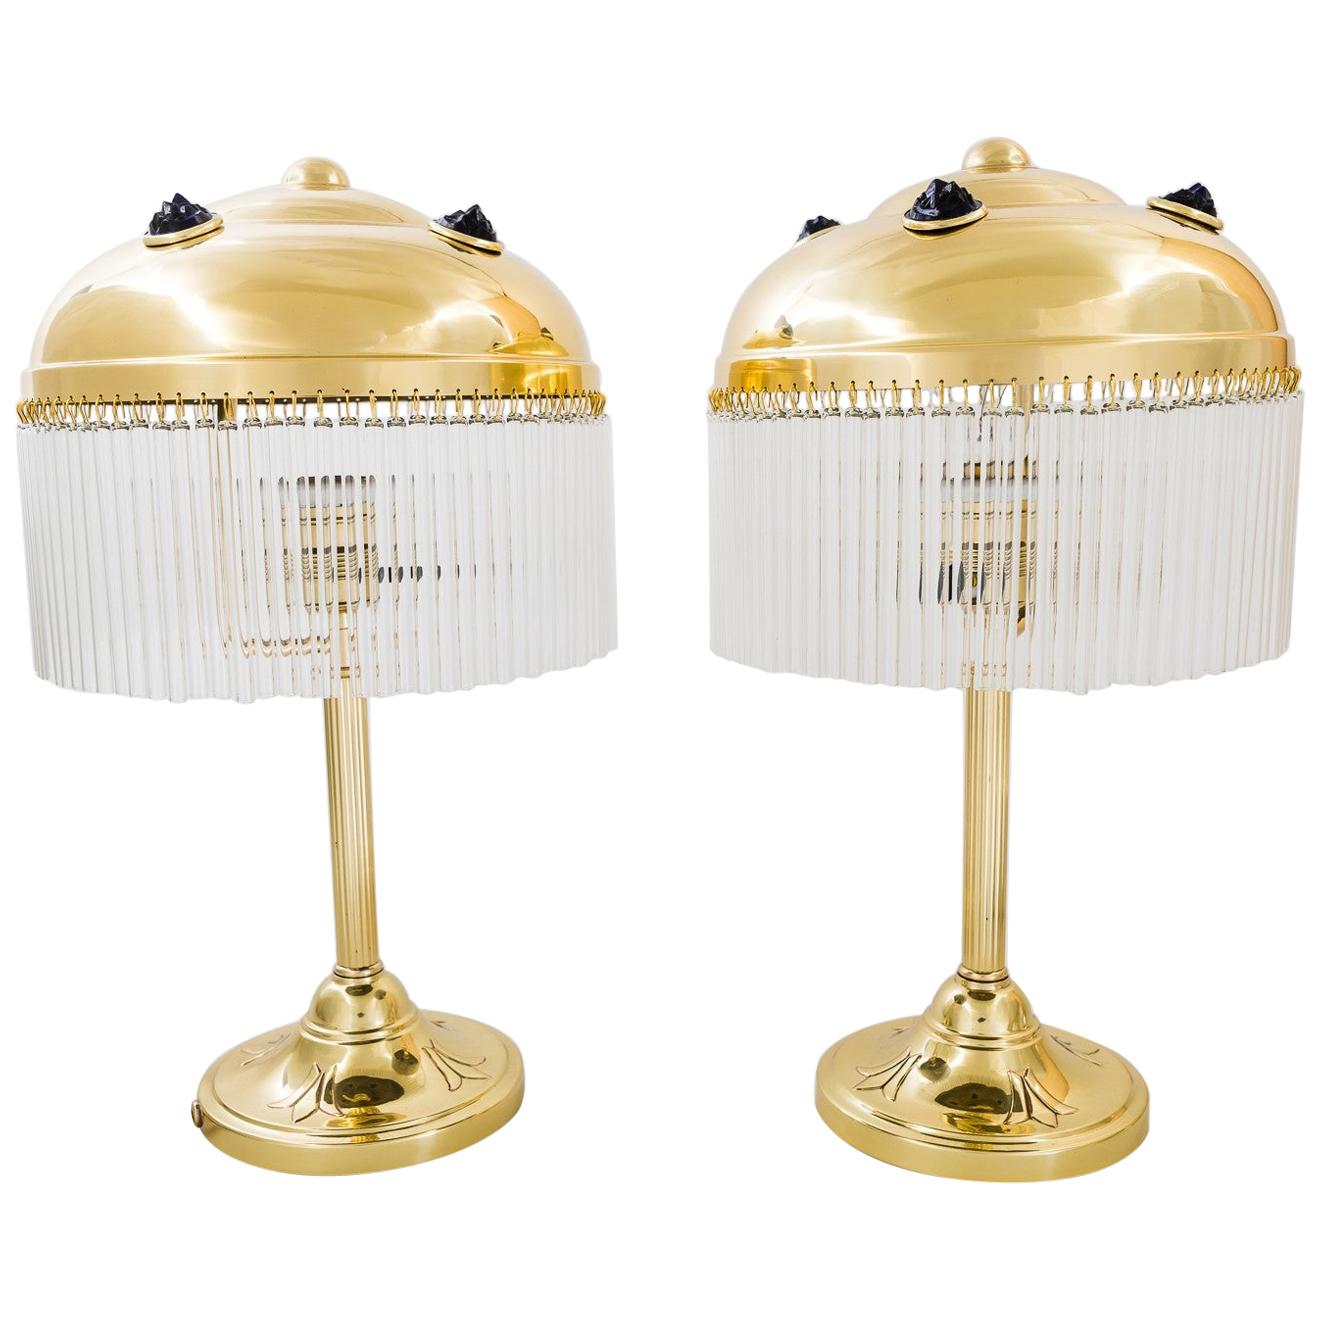 Two Art Deco Table Lamps, Vienna, circa 1920s